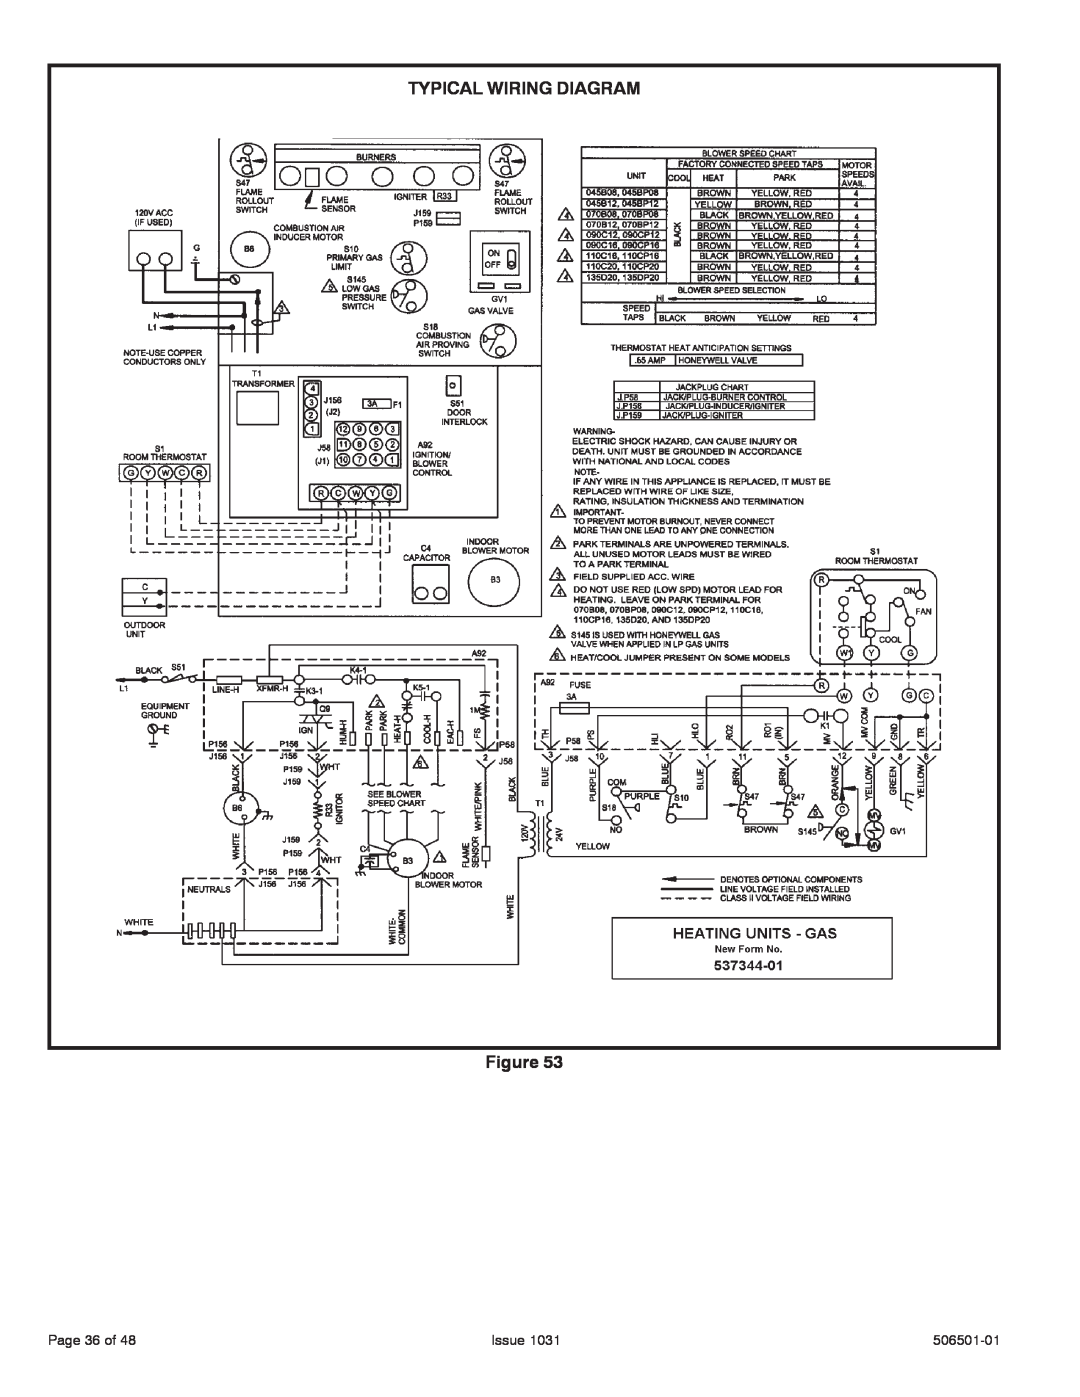 Allied Air Enterprises A95UH, 95G1UH, A93UH, 92G1UH TYPICAL WIRING DIAGRAM Figure, Page 36 of, Issue, 506501-01 